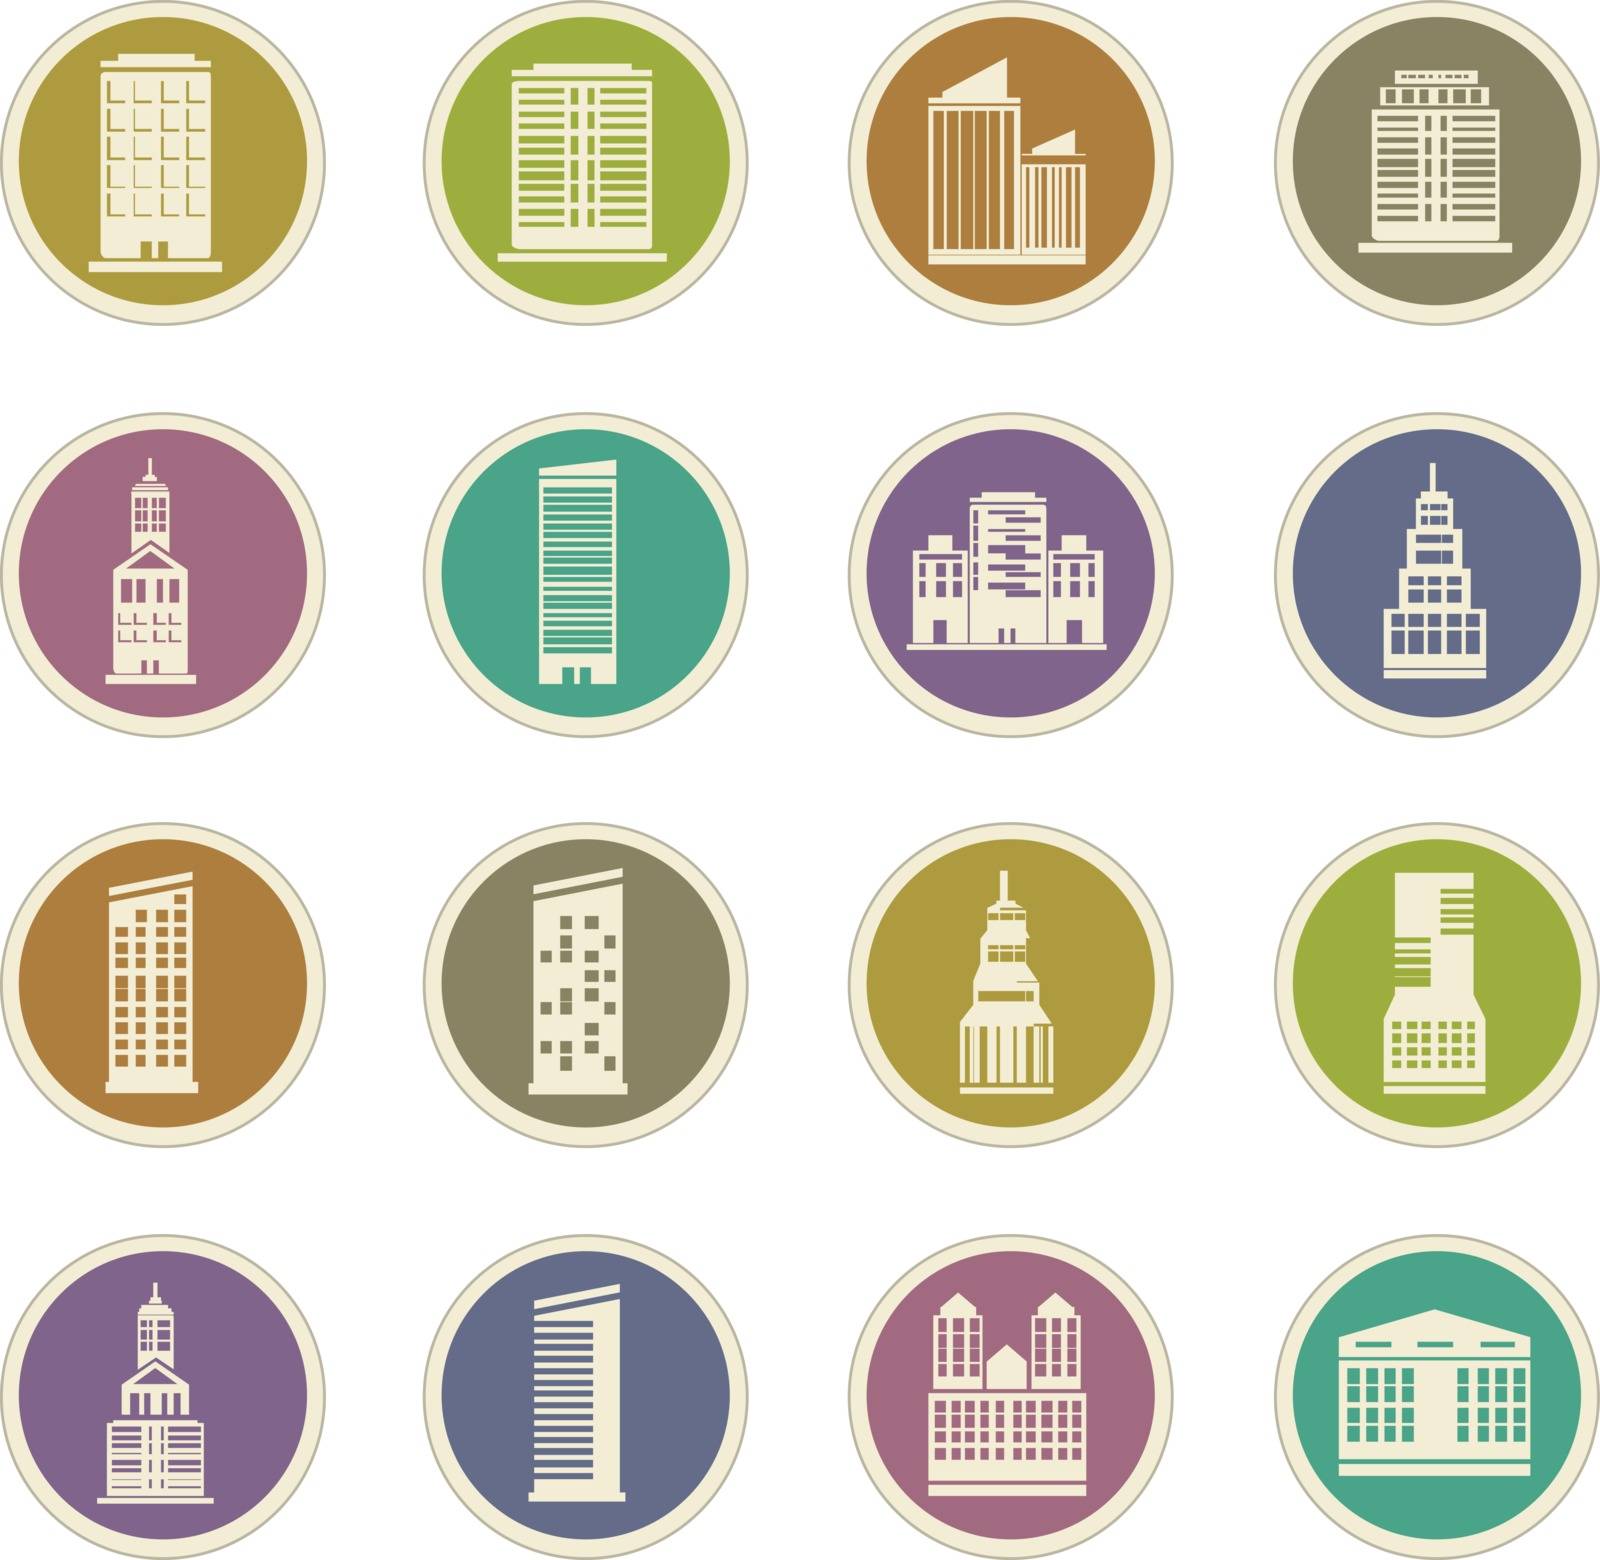 Buildings  icon set for web sites and user interface